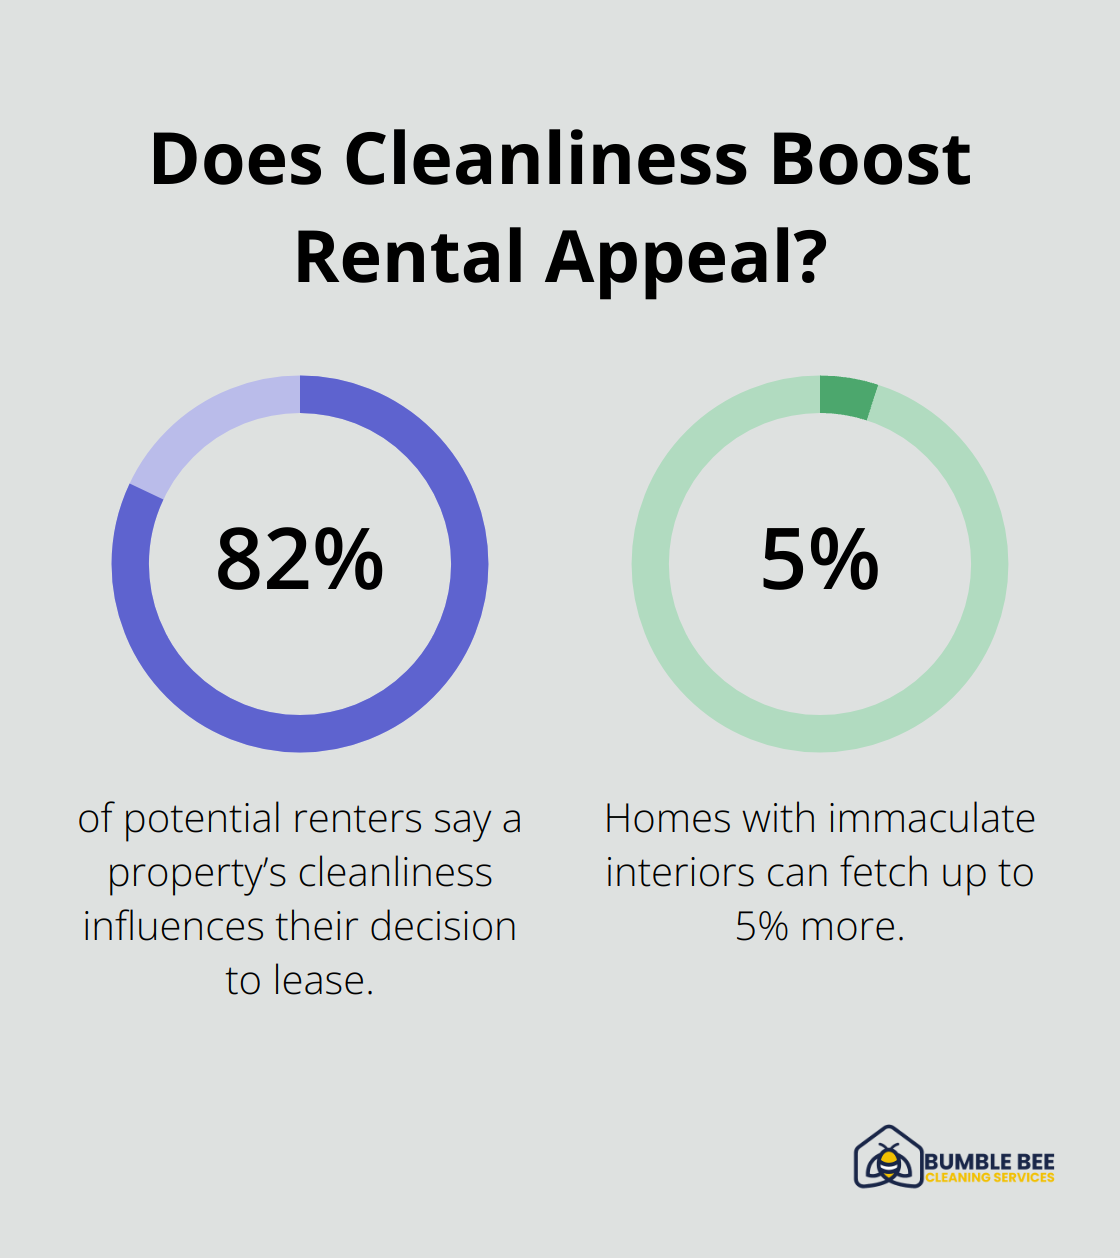 Fact - Does Cleanliness Boost Rental Appeal?